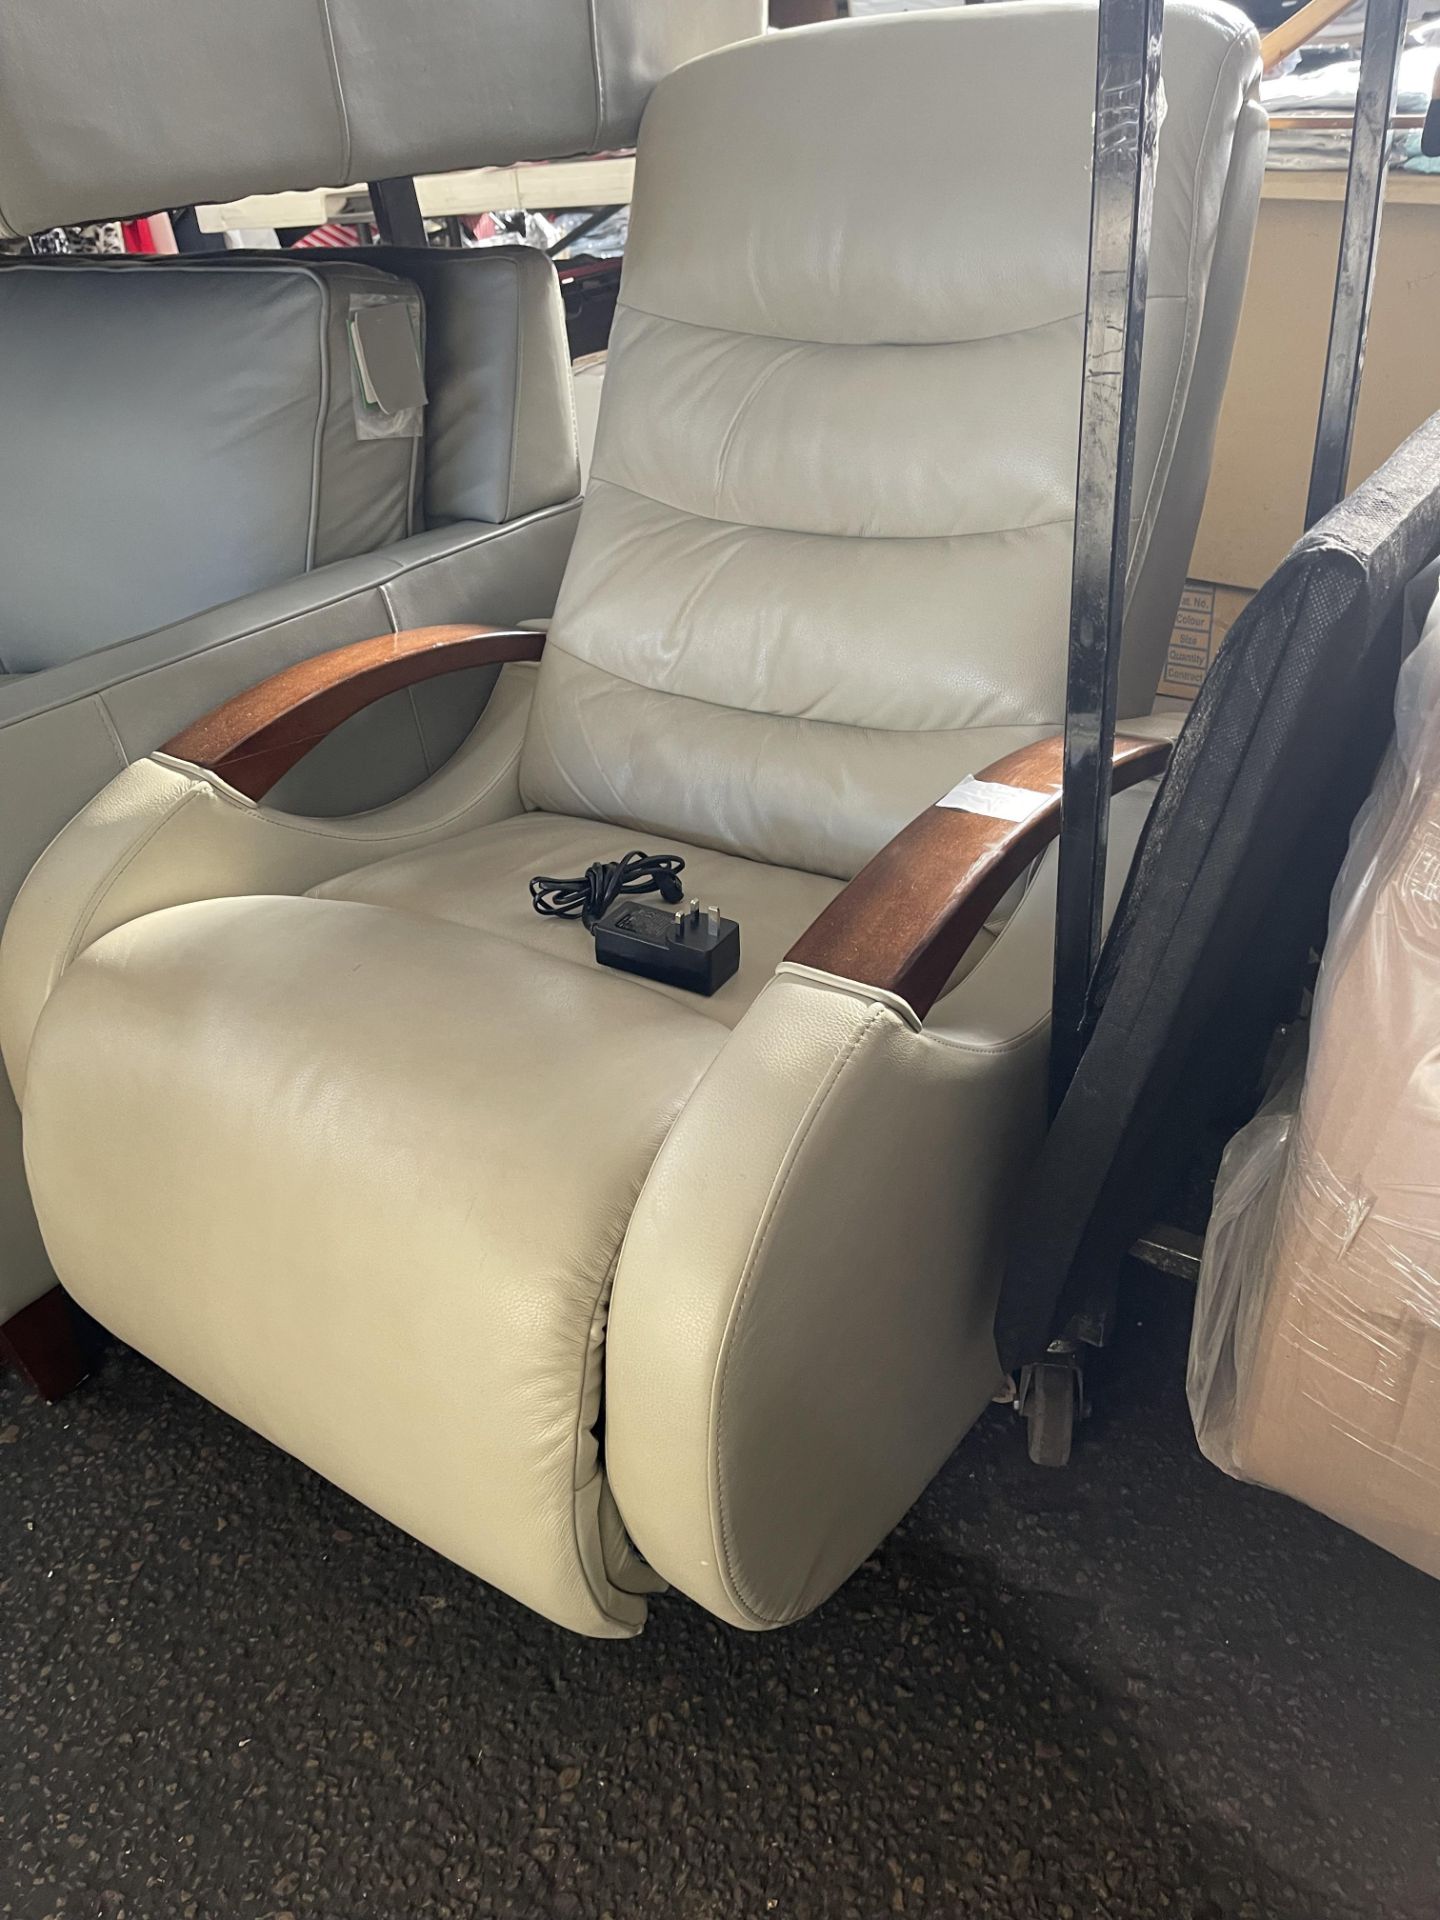 NO VAT!!! Thomasville Benson Cream Leather Power Glider Rocker and Reclining Chair with USB Port. - Image 2 of 3